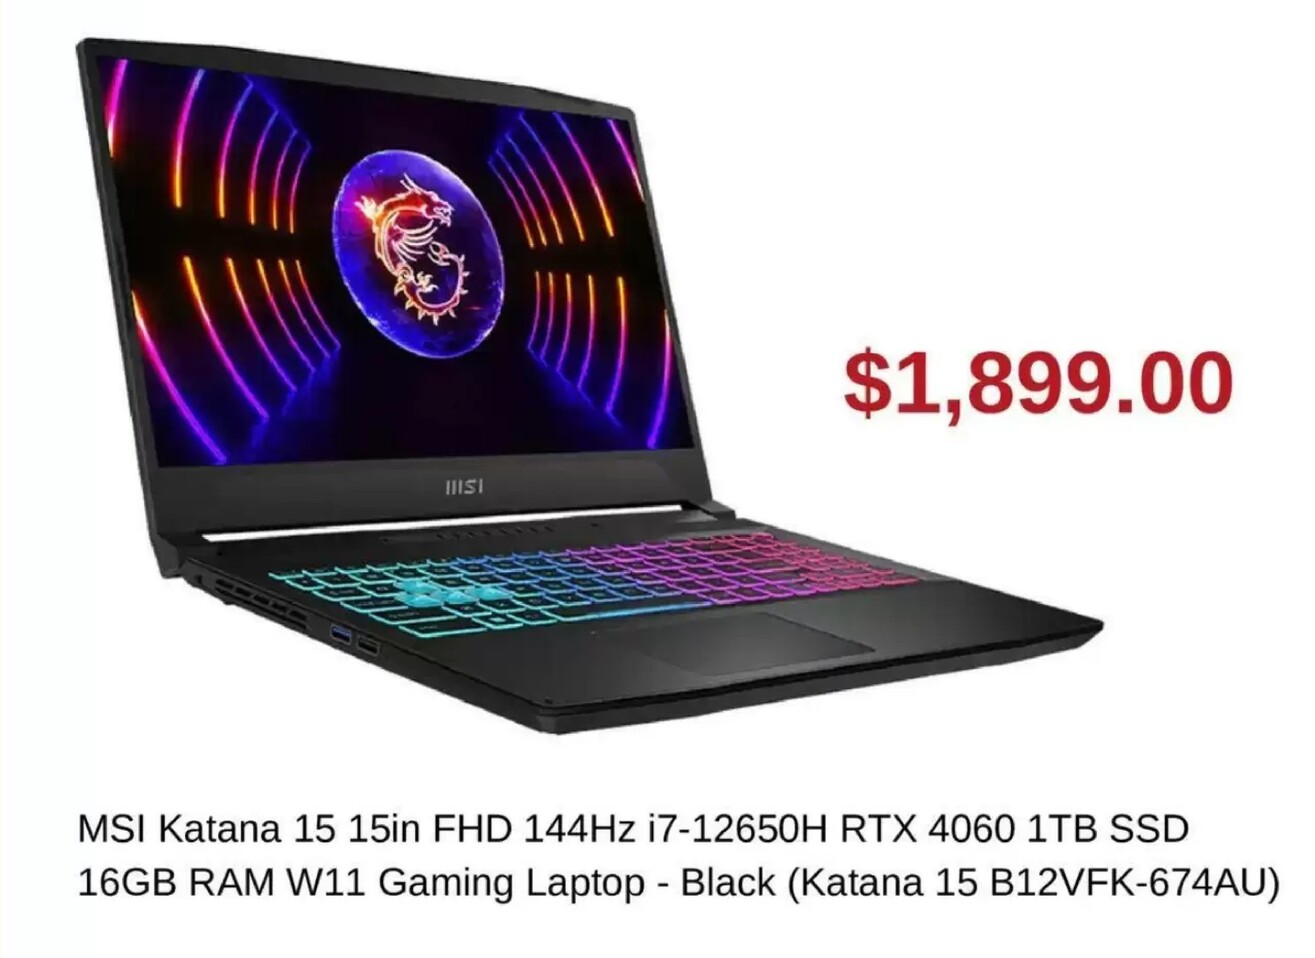 Katana Msi 15 15in Fhd 144hz I7-12650h Rtx 4060 1tb Ssd 16gb Ram W11 Gaming Laptop - Black offers at $1899 in MSY Technology